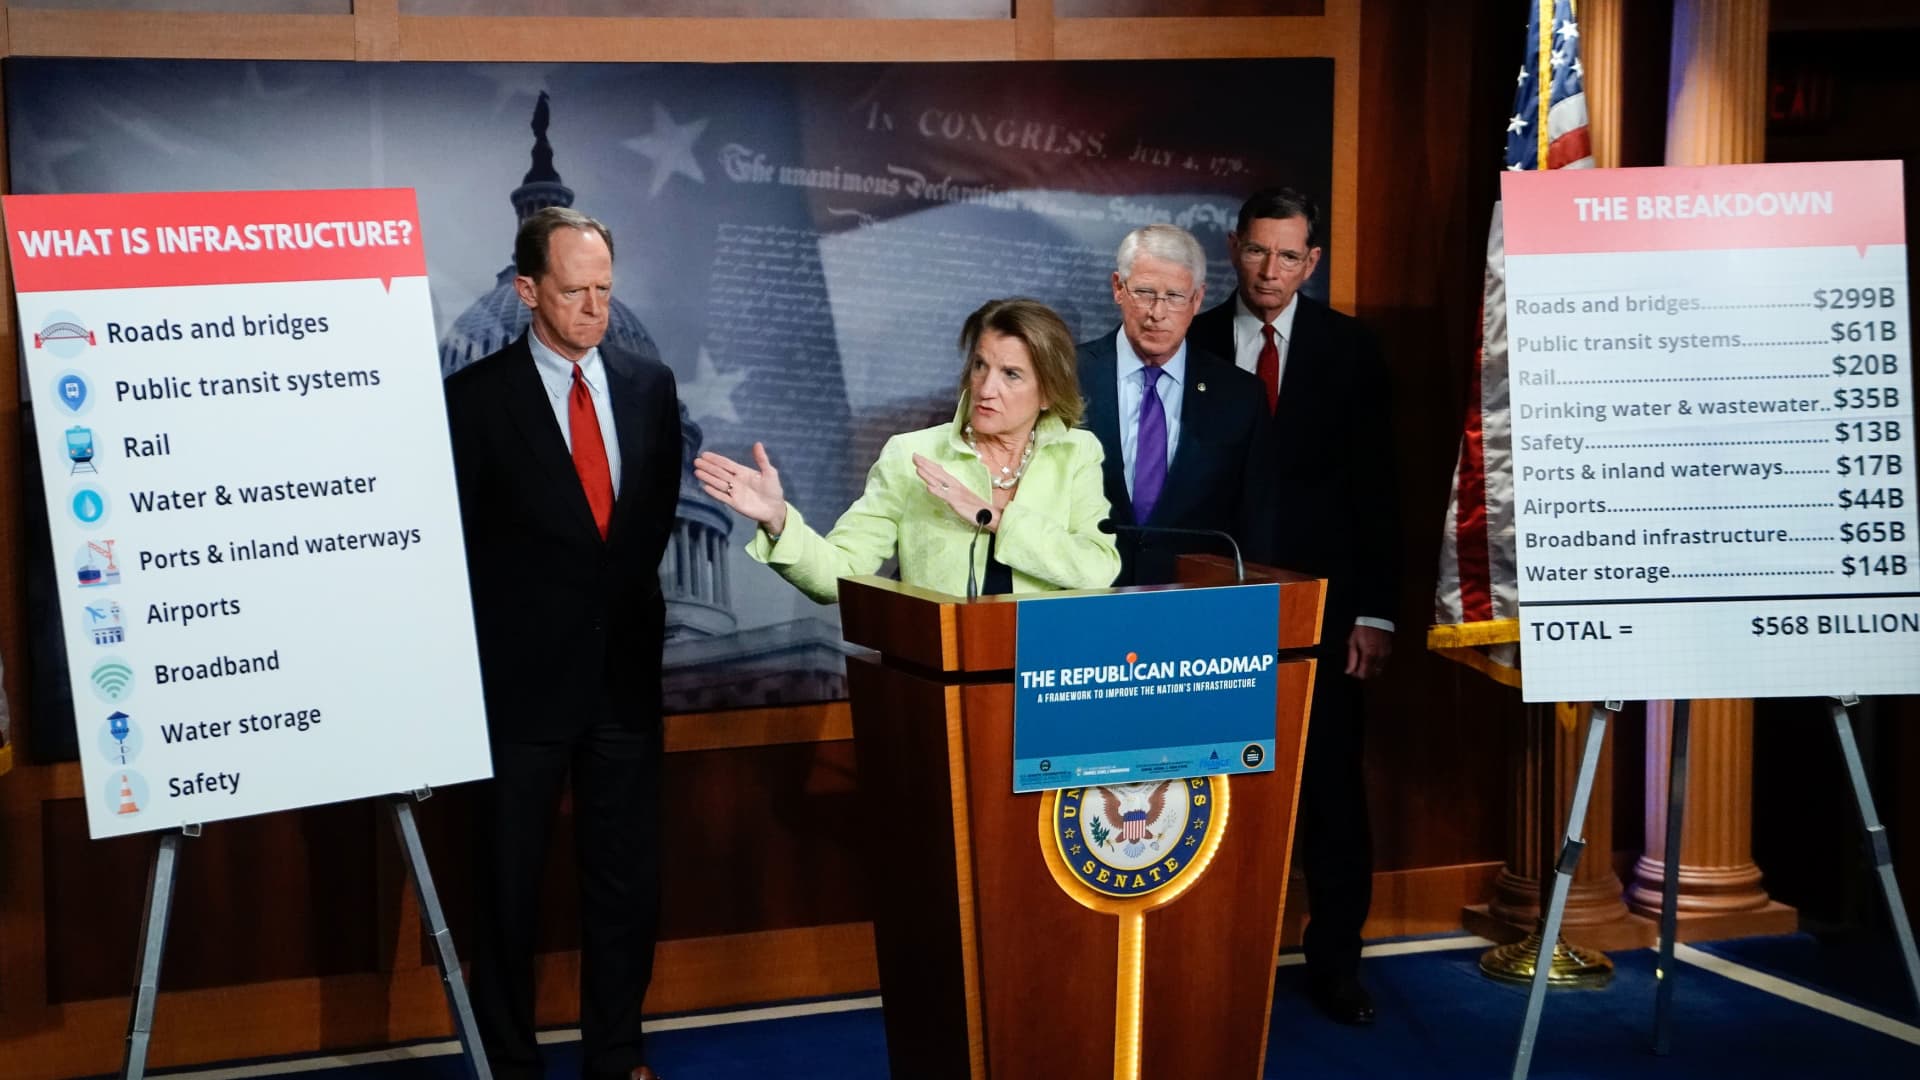 Shelley Capito (R-WV) speaks during a news conference to introduce the Republican infrastructure plan, at the U.S. Capitol in Washington, U.S., April 22, 2021.